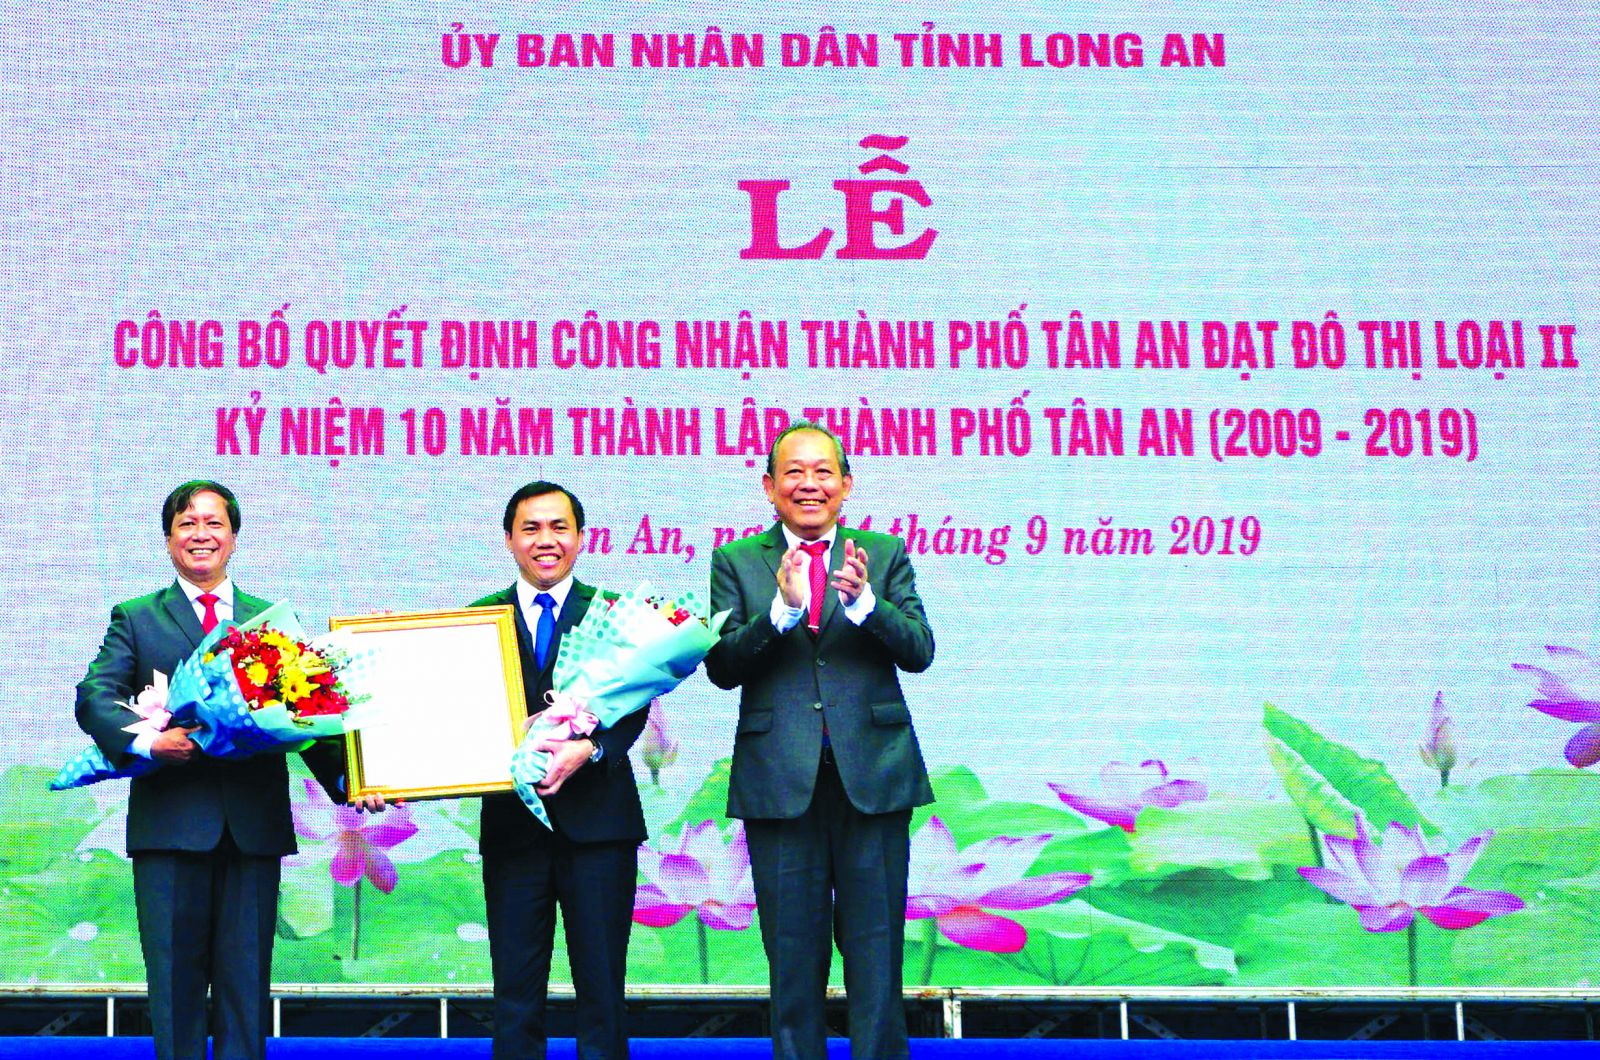 Under the authorization of the Prime Minister, the Standing Deputy Prime Minister - Truong Hoa Binh awards the Decision on recognizing Tan An city as a type-II city to city leaders.